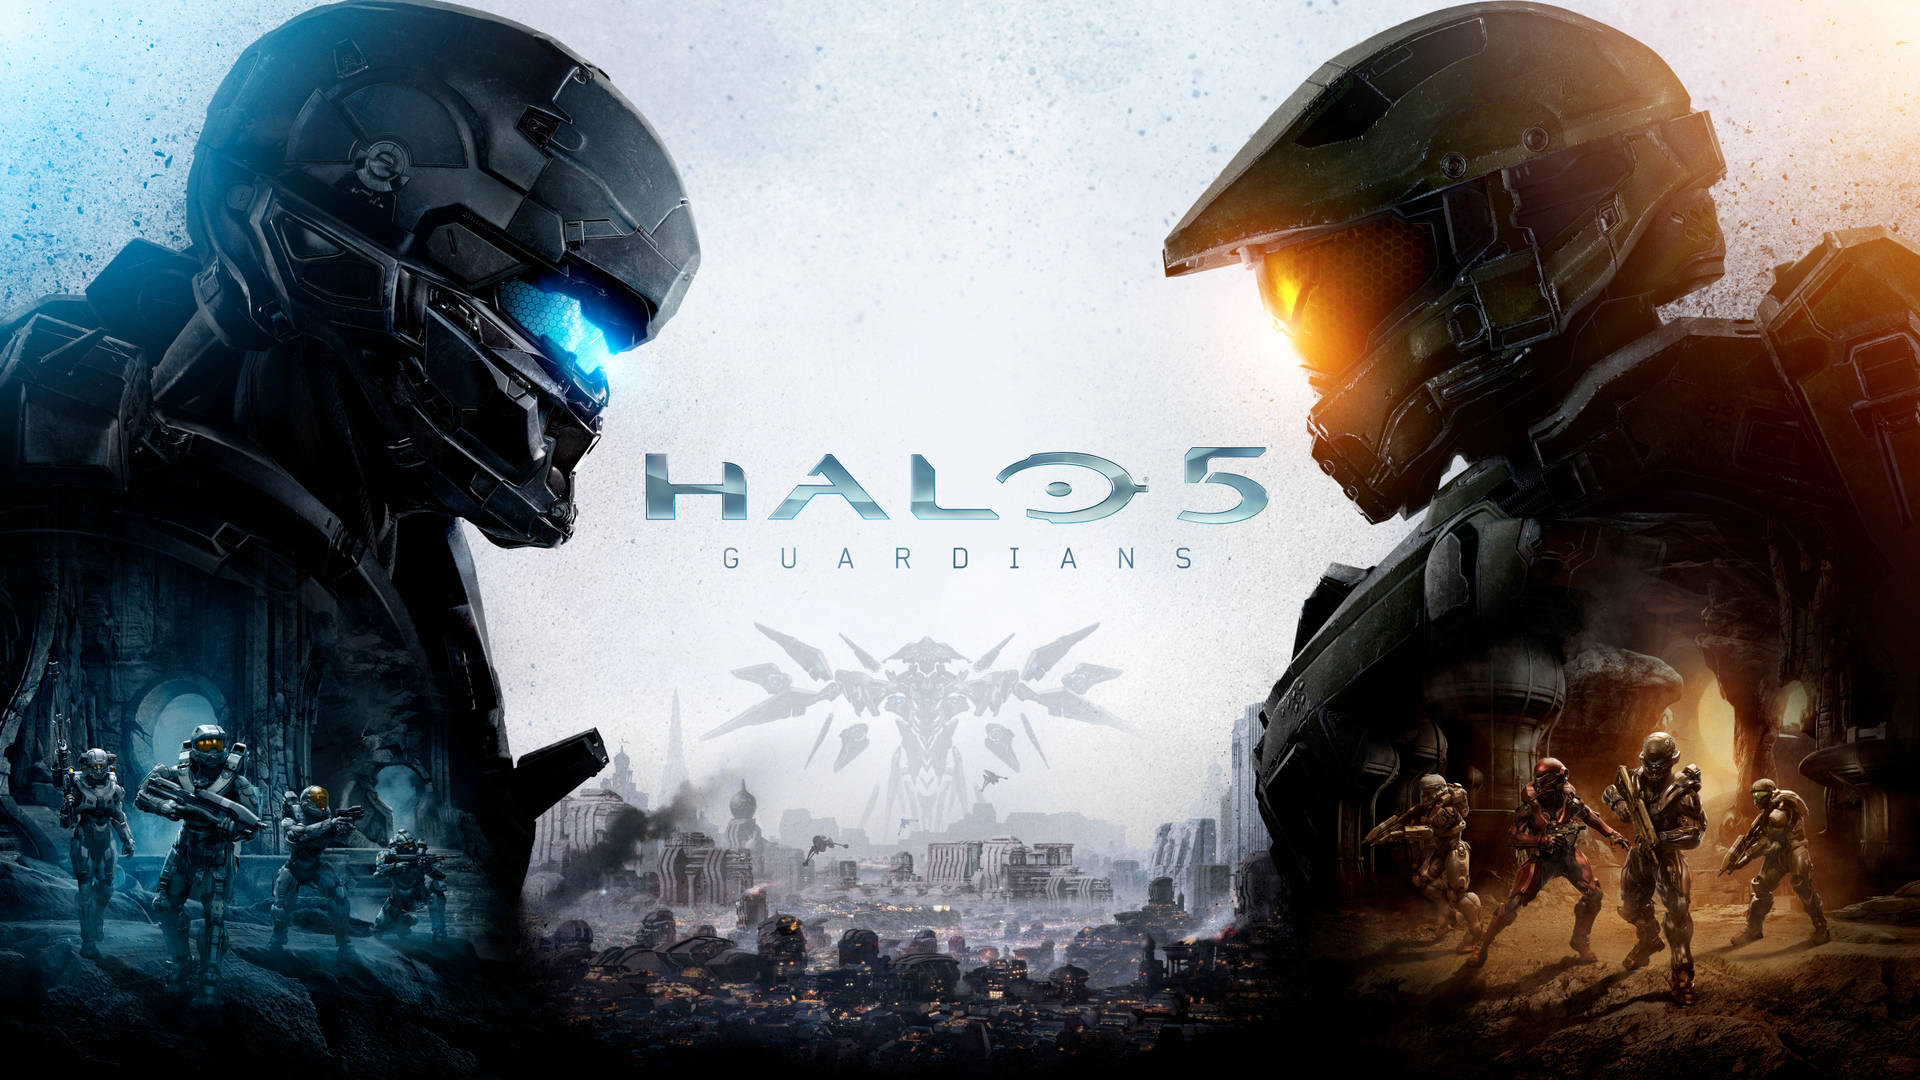 Exciting Battle Scene from Halo 5 in Stunning 4K Resolution Wallpaper